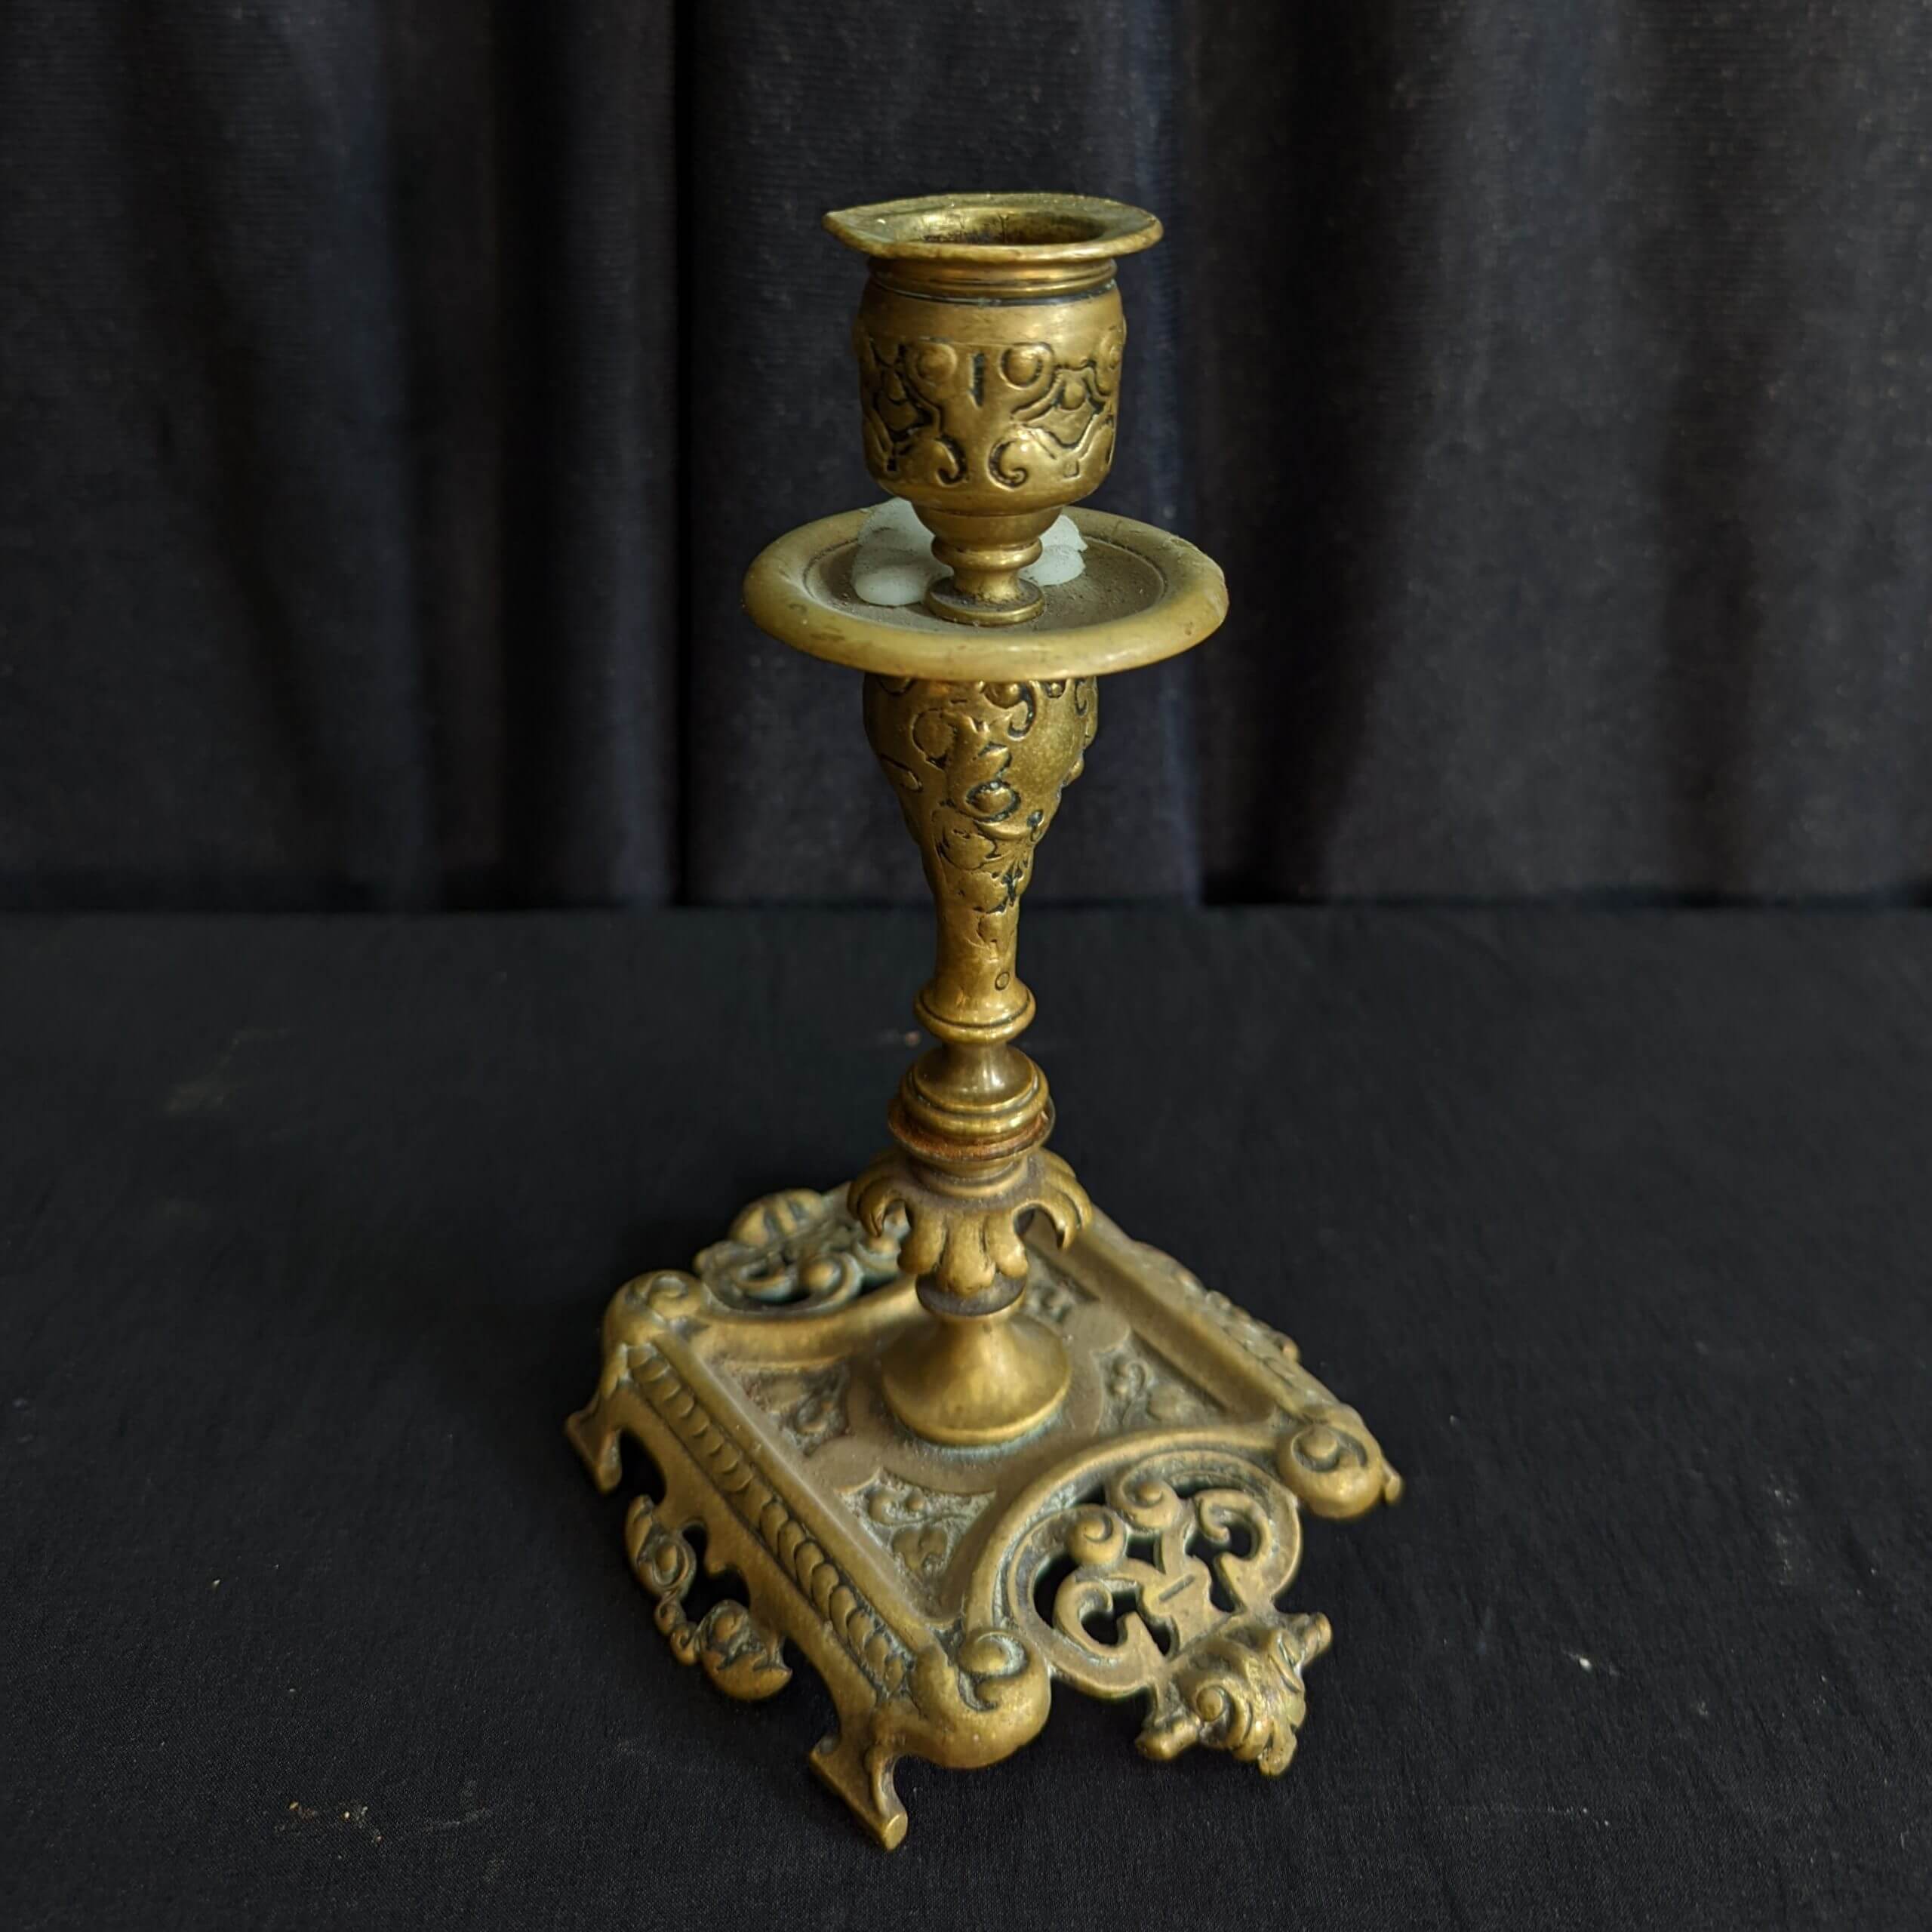 Highly Ornate & Decorative Antique Small Brass Baroque Style Candleholder  (SOLD) - Antique Church Furnishings